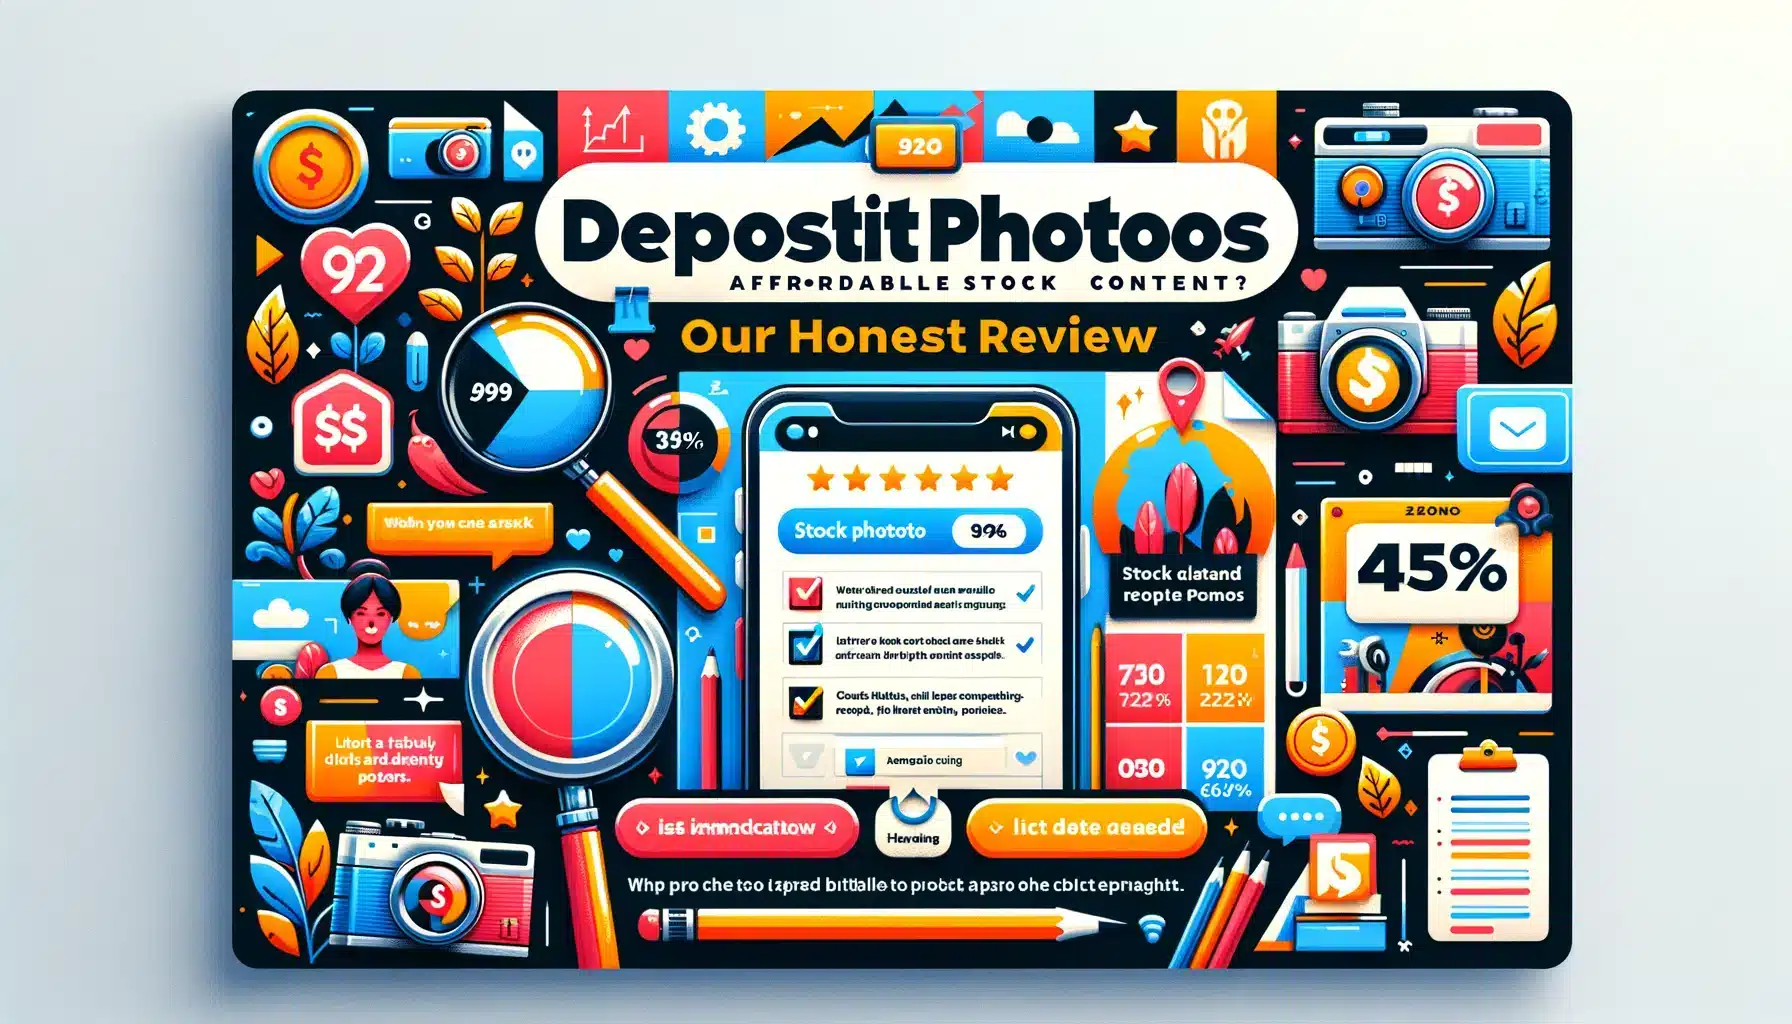 Depositphotos Affordable Stock Content? Our Honest Review